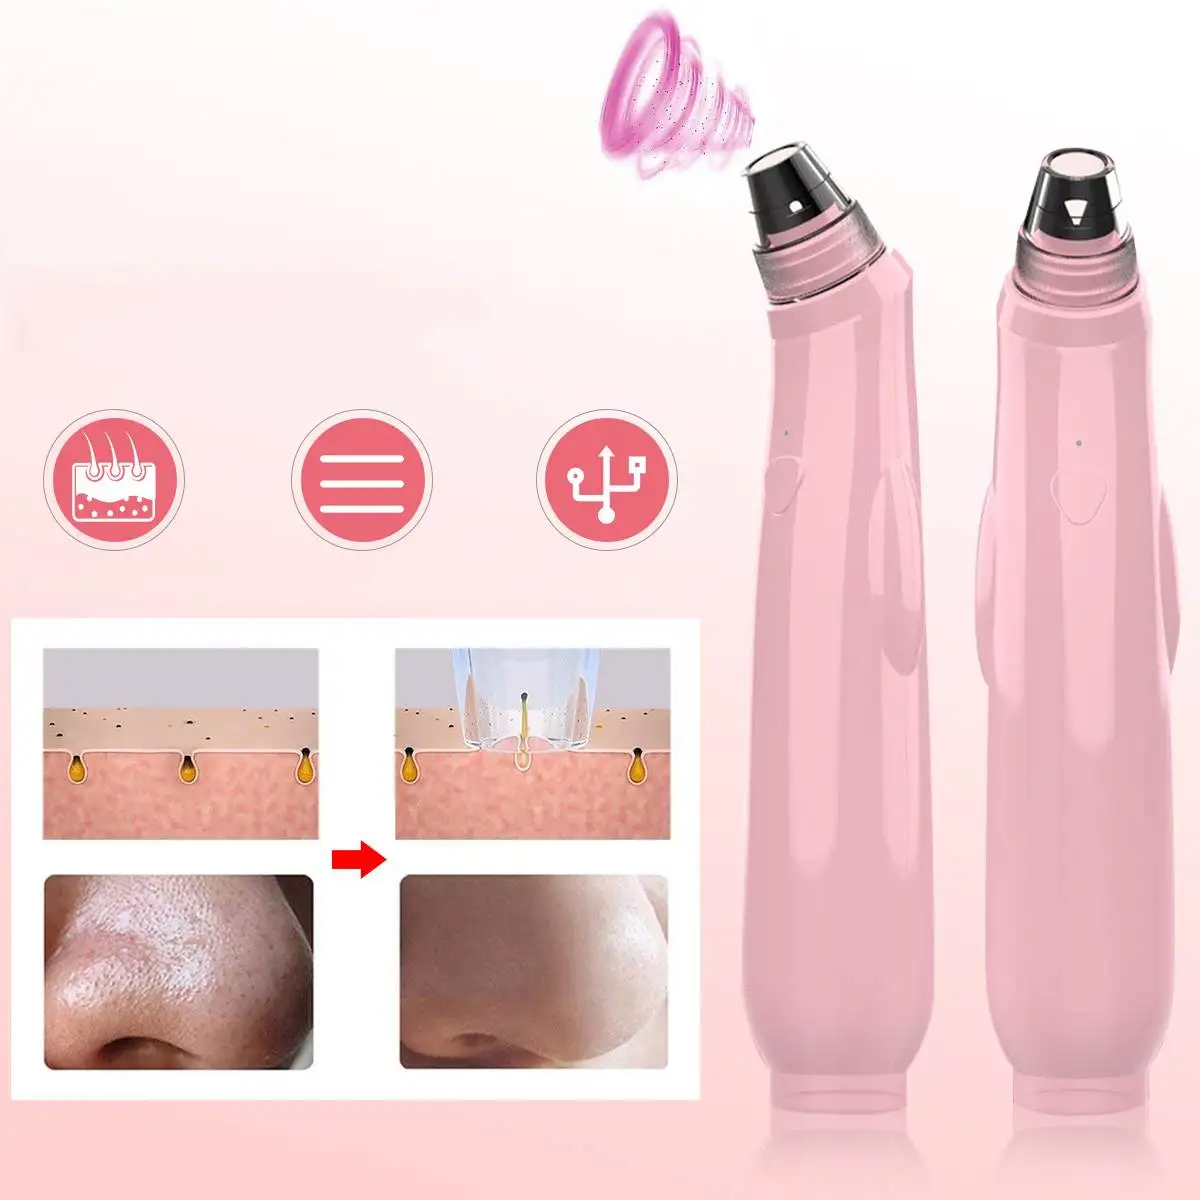 Wireless Blackhead Vacuum Acne Cleaner Dot Pimple Pore Remover Electric Care with Charging Cleaner Pore Skin Care Tools